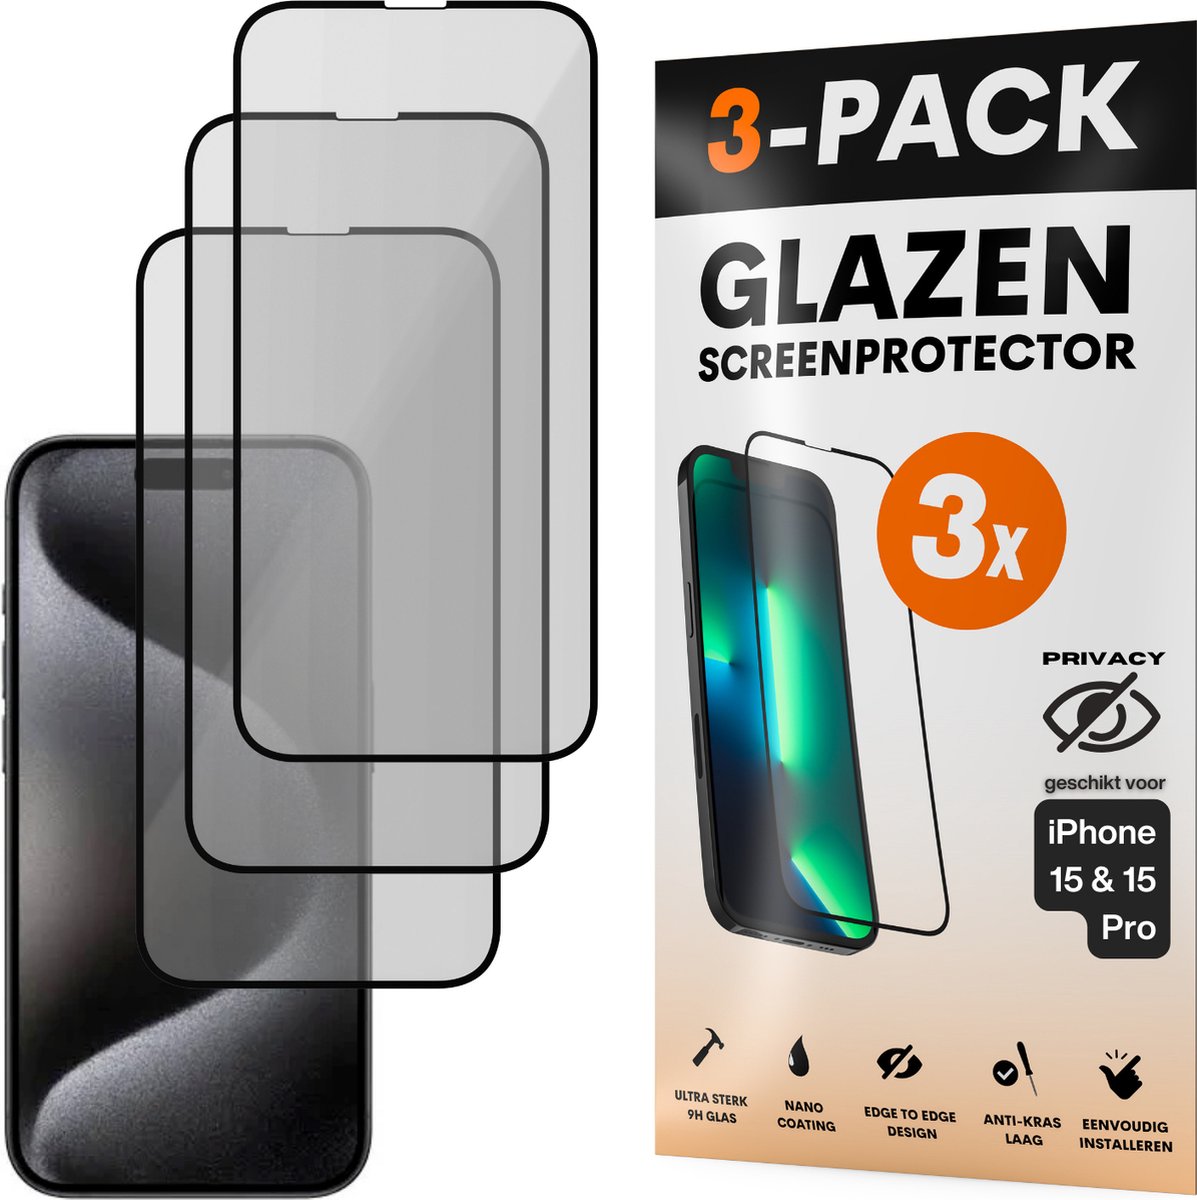 Privacy Screenprotector - Geschikt voor iPhone 15 / 15 Pro - Gehard Glas - Full Cover Tempered Privacy Glass - Case Friendly - 3 Pack